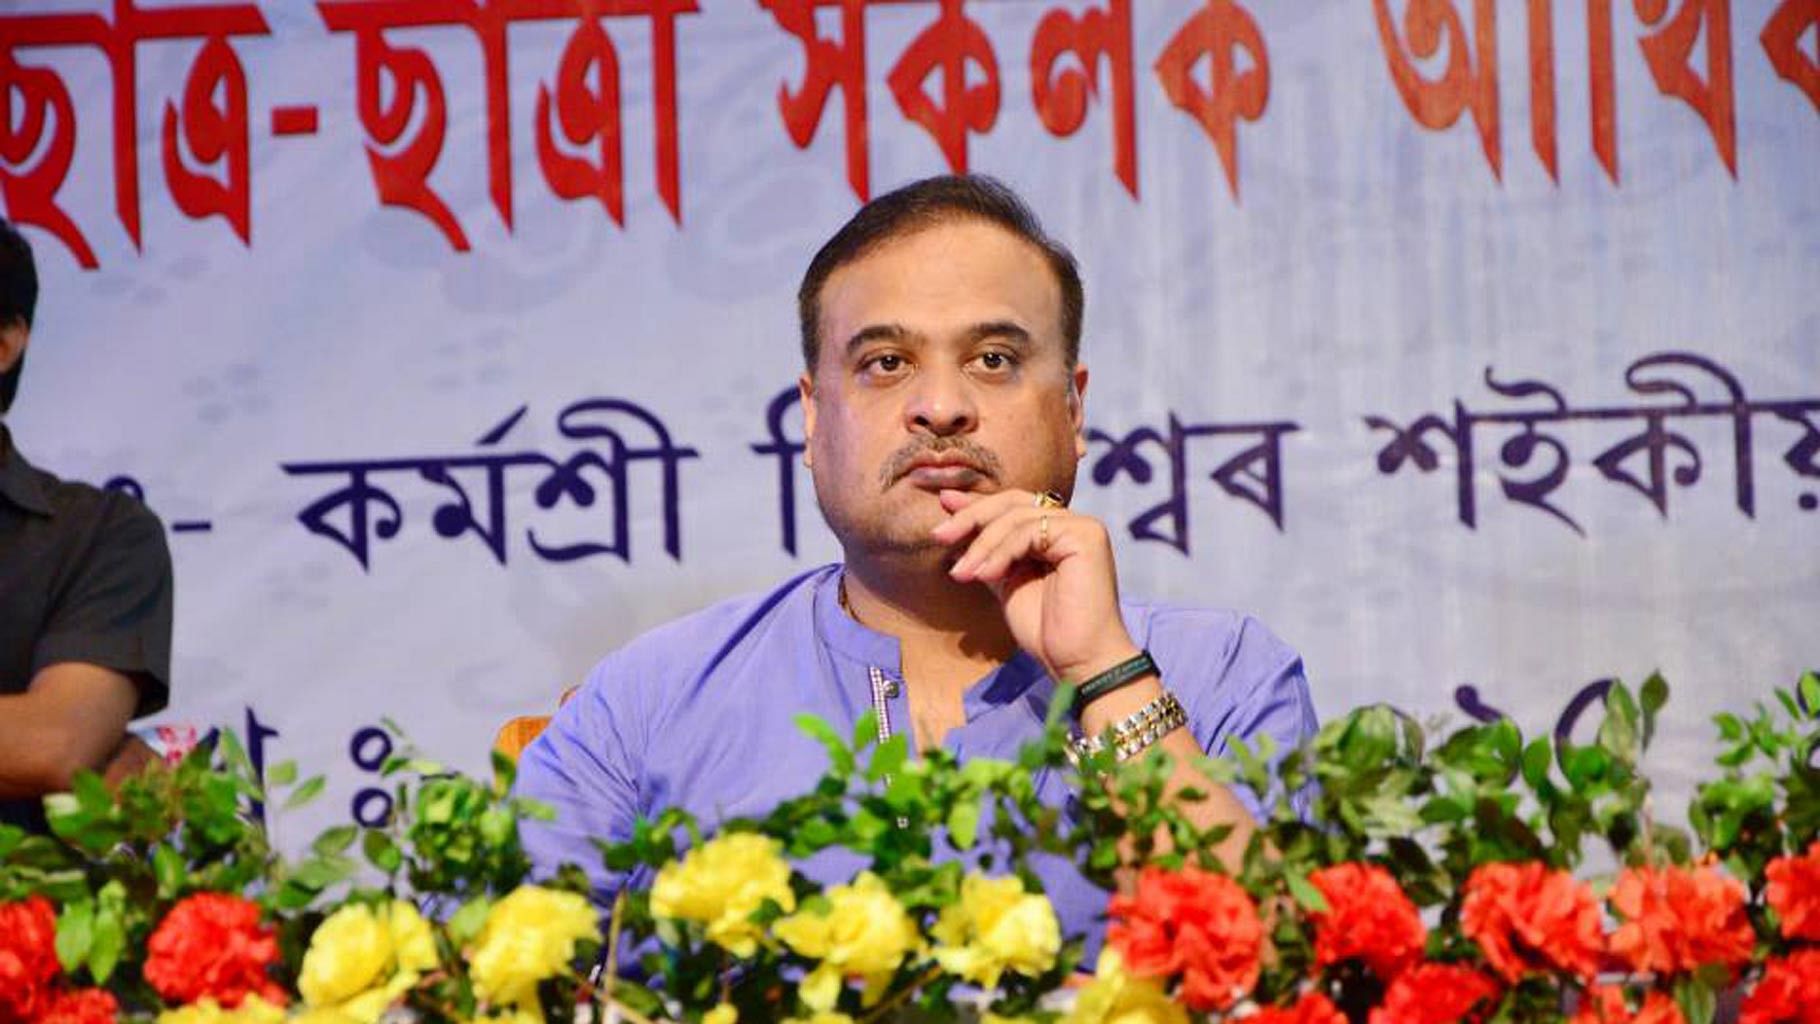 Formerly, a close aide to Traun Gogoi, Sarma is being considered as the game changer in the Assam assembly elections. (Photo courtesy: Facebook/<a href="https://www.facebook.com/himantabiswasarma/?fref=ts">Himanta Biswa Sarma</a>)